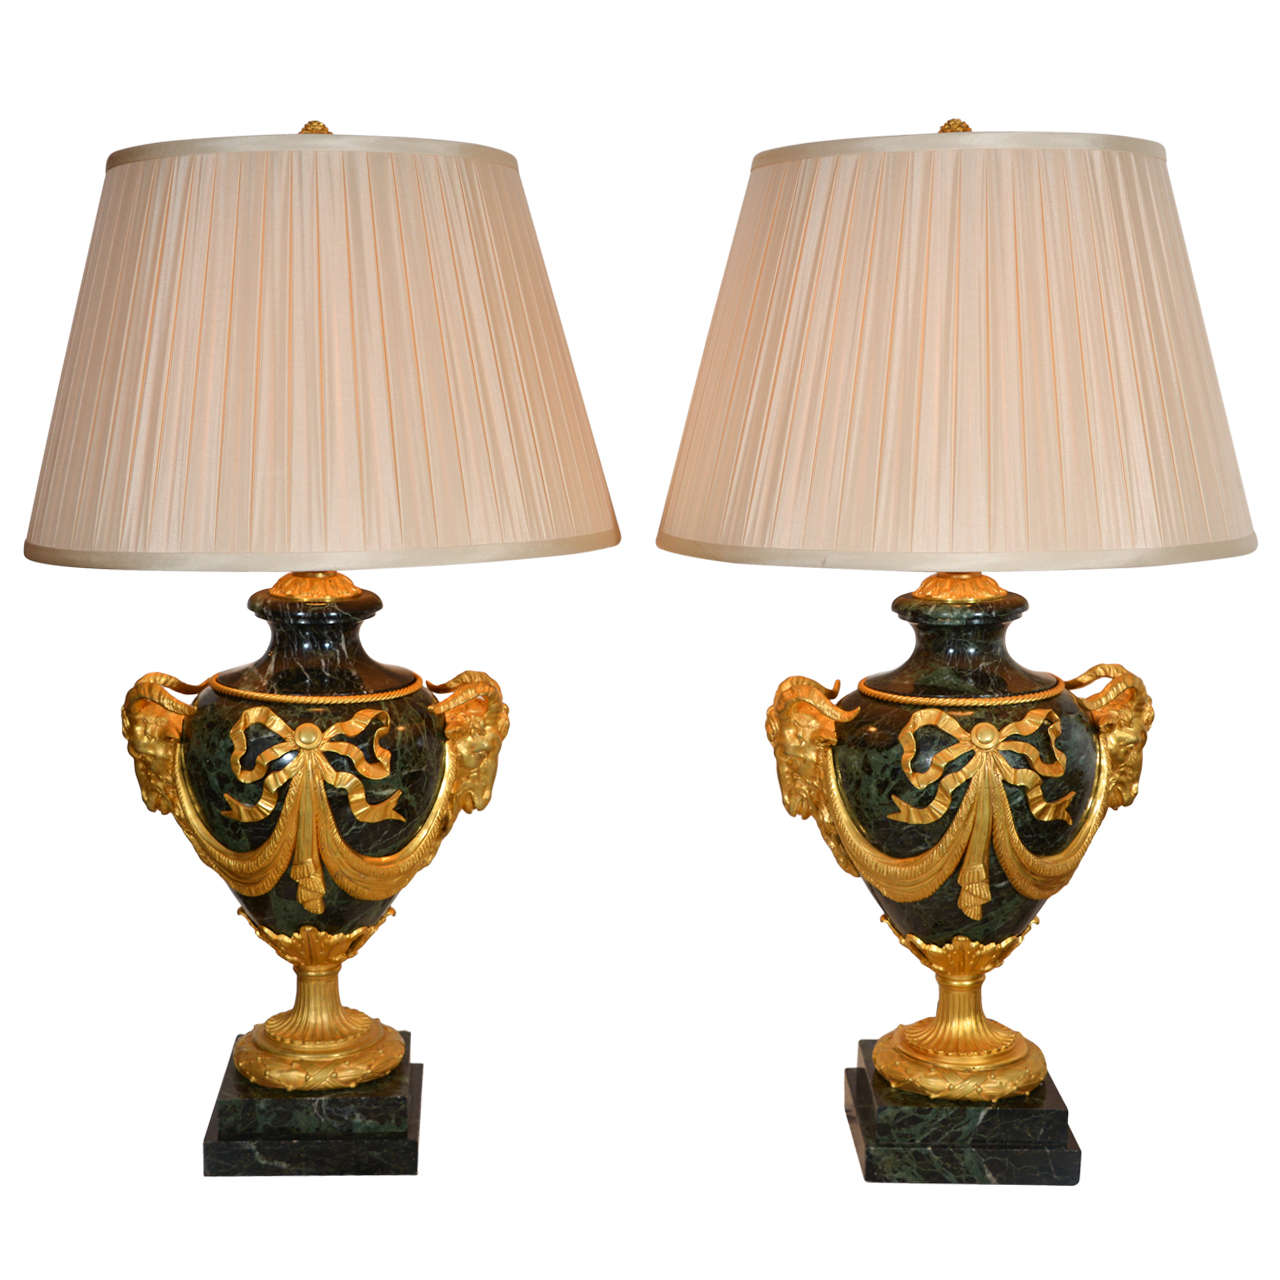 Pair Of 19th Century Louis XVI Marble and Bronze Dore Urn Lamps